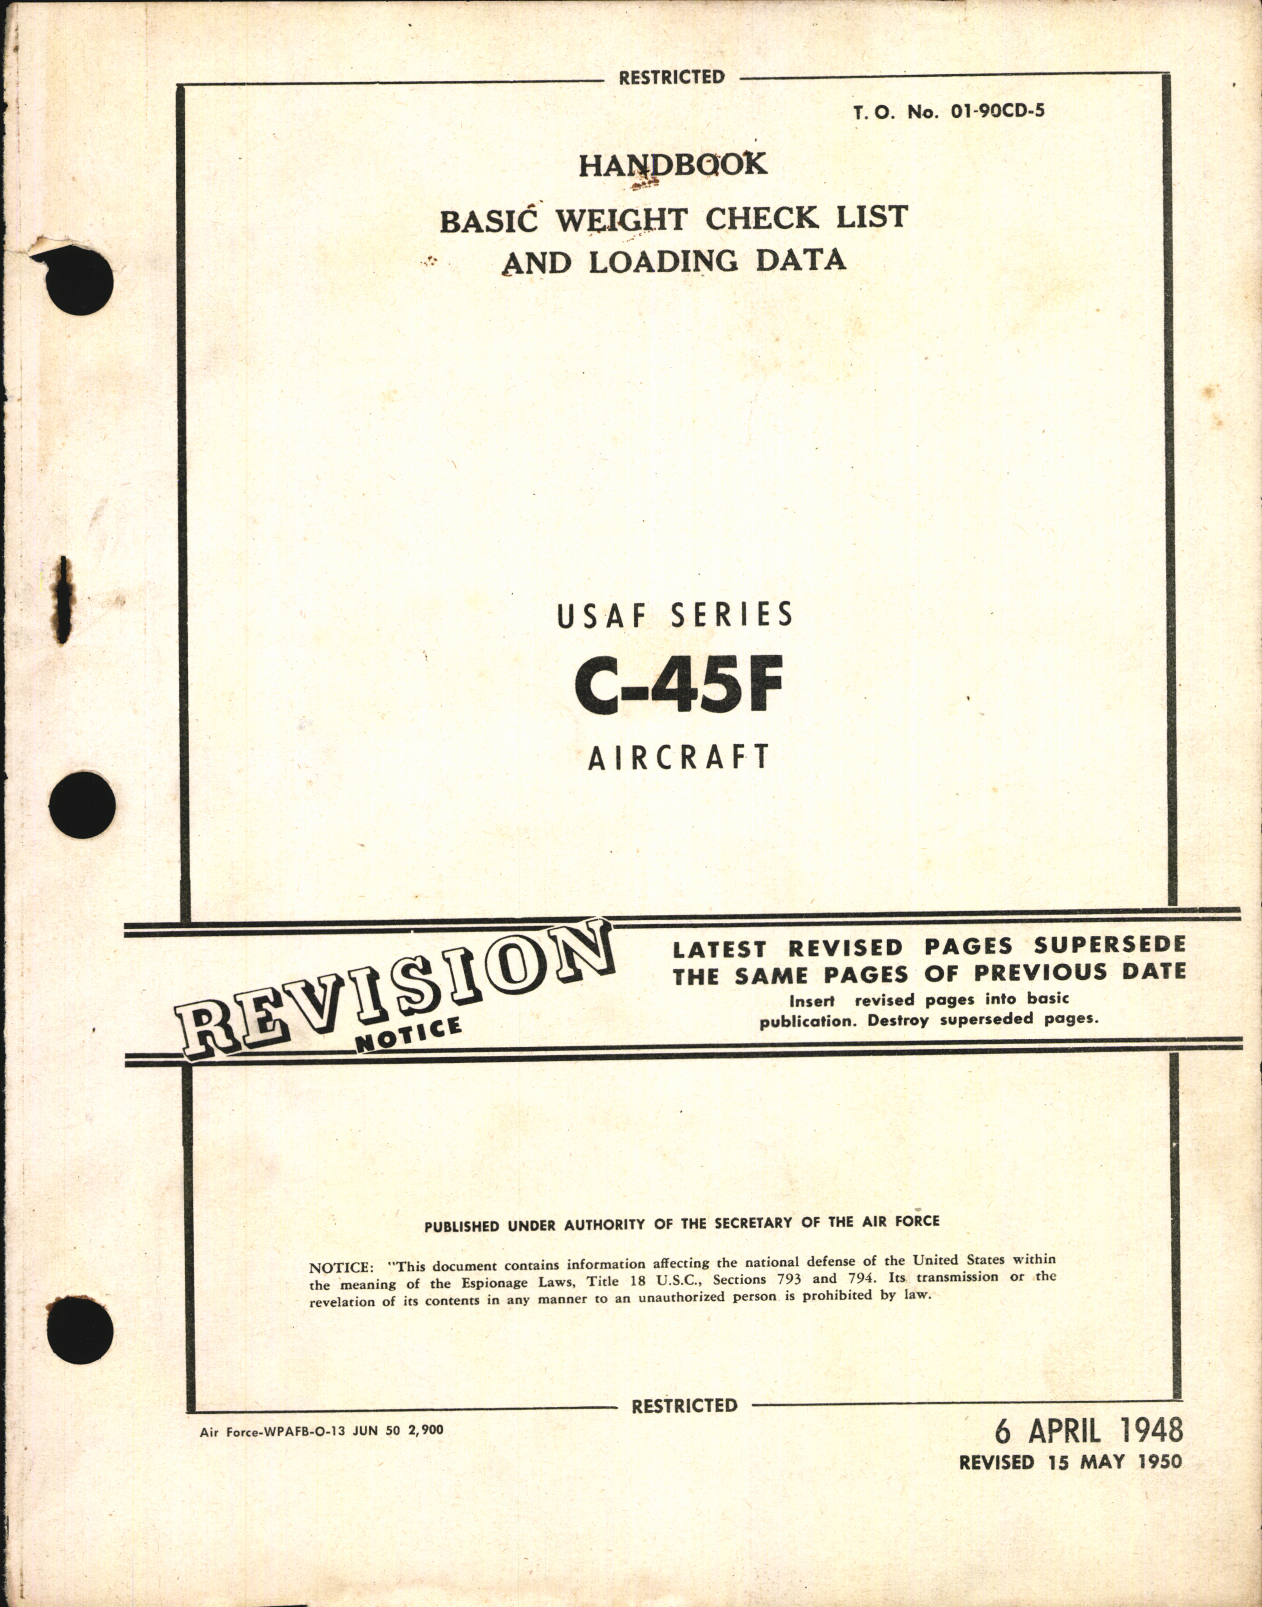 Sample page 1 from AirCorps Library document: Basic Weight Check List and Loading Data for C-45F